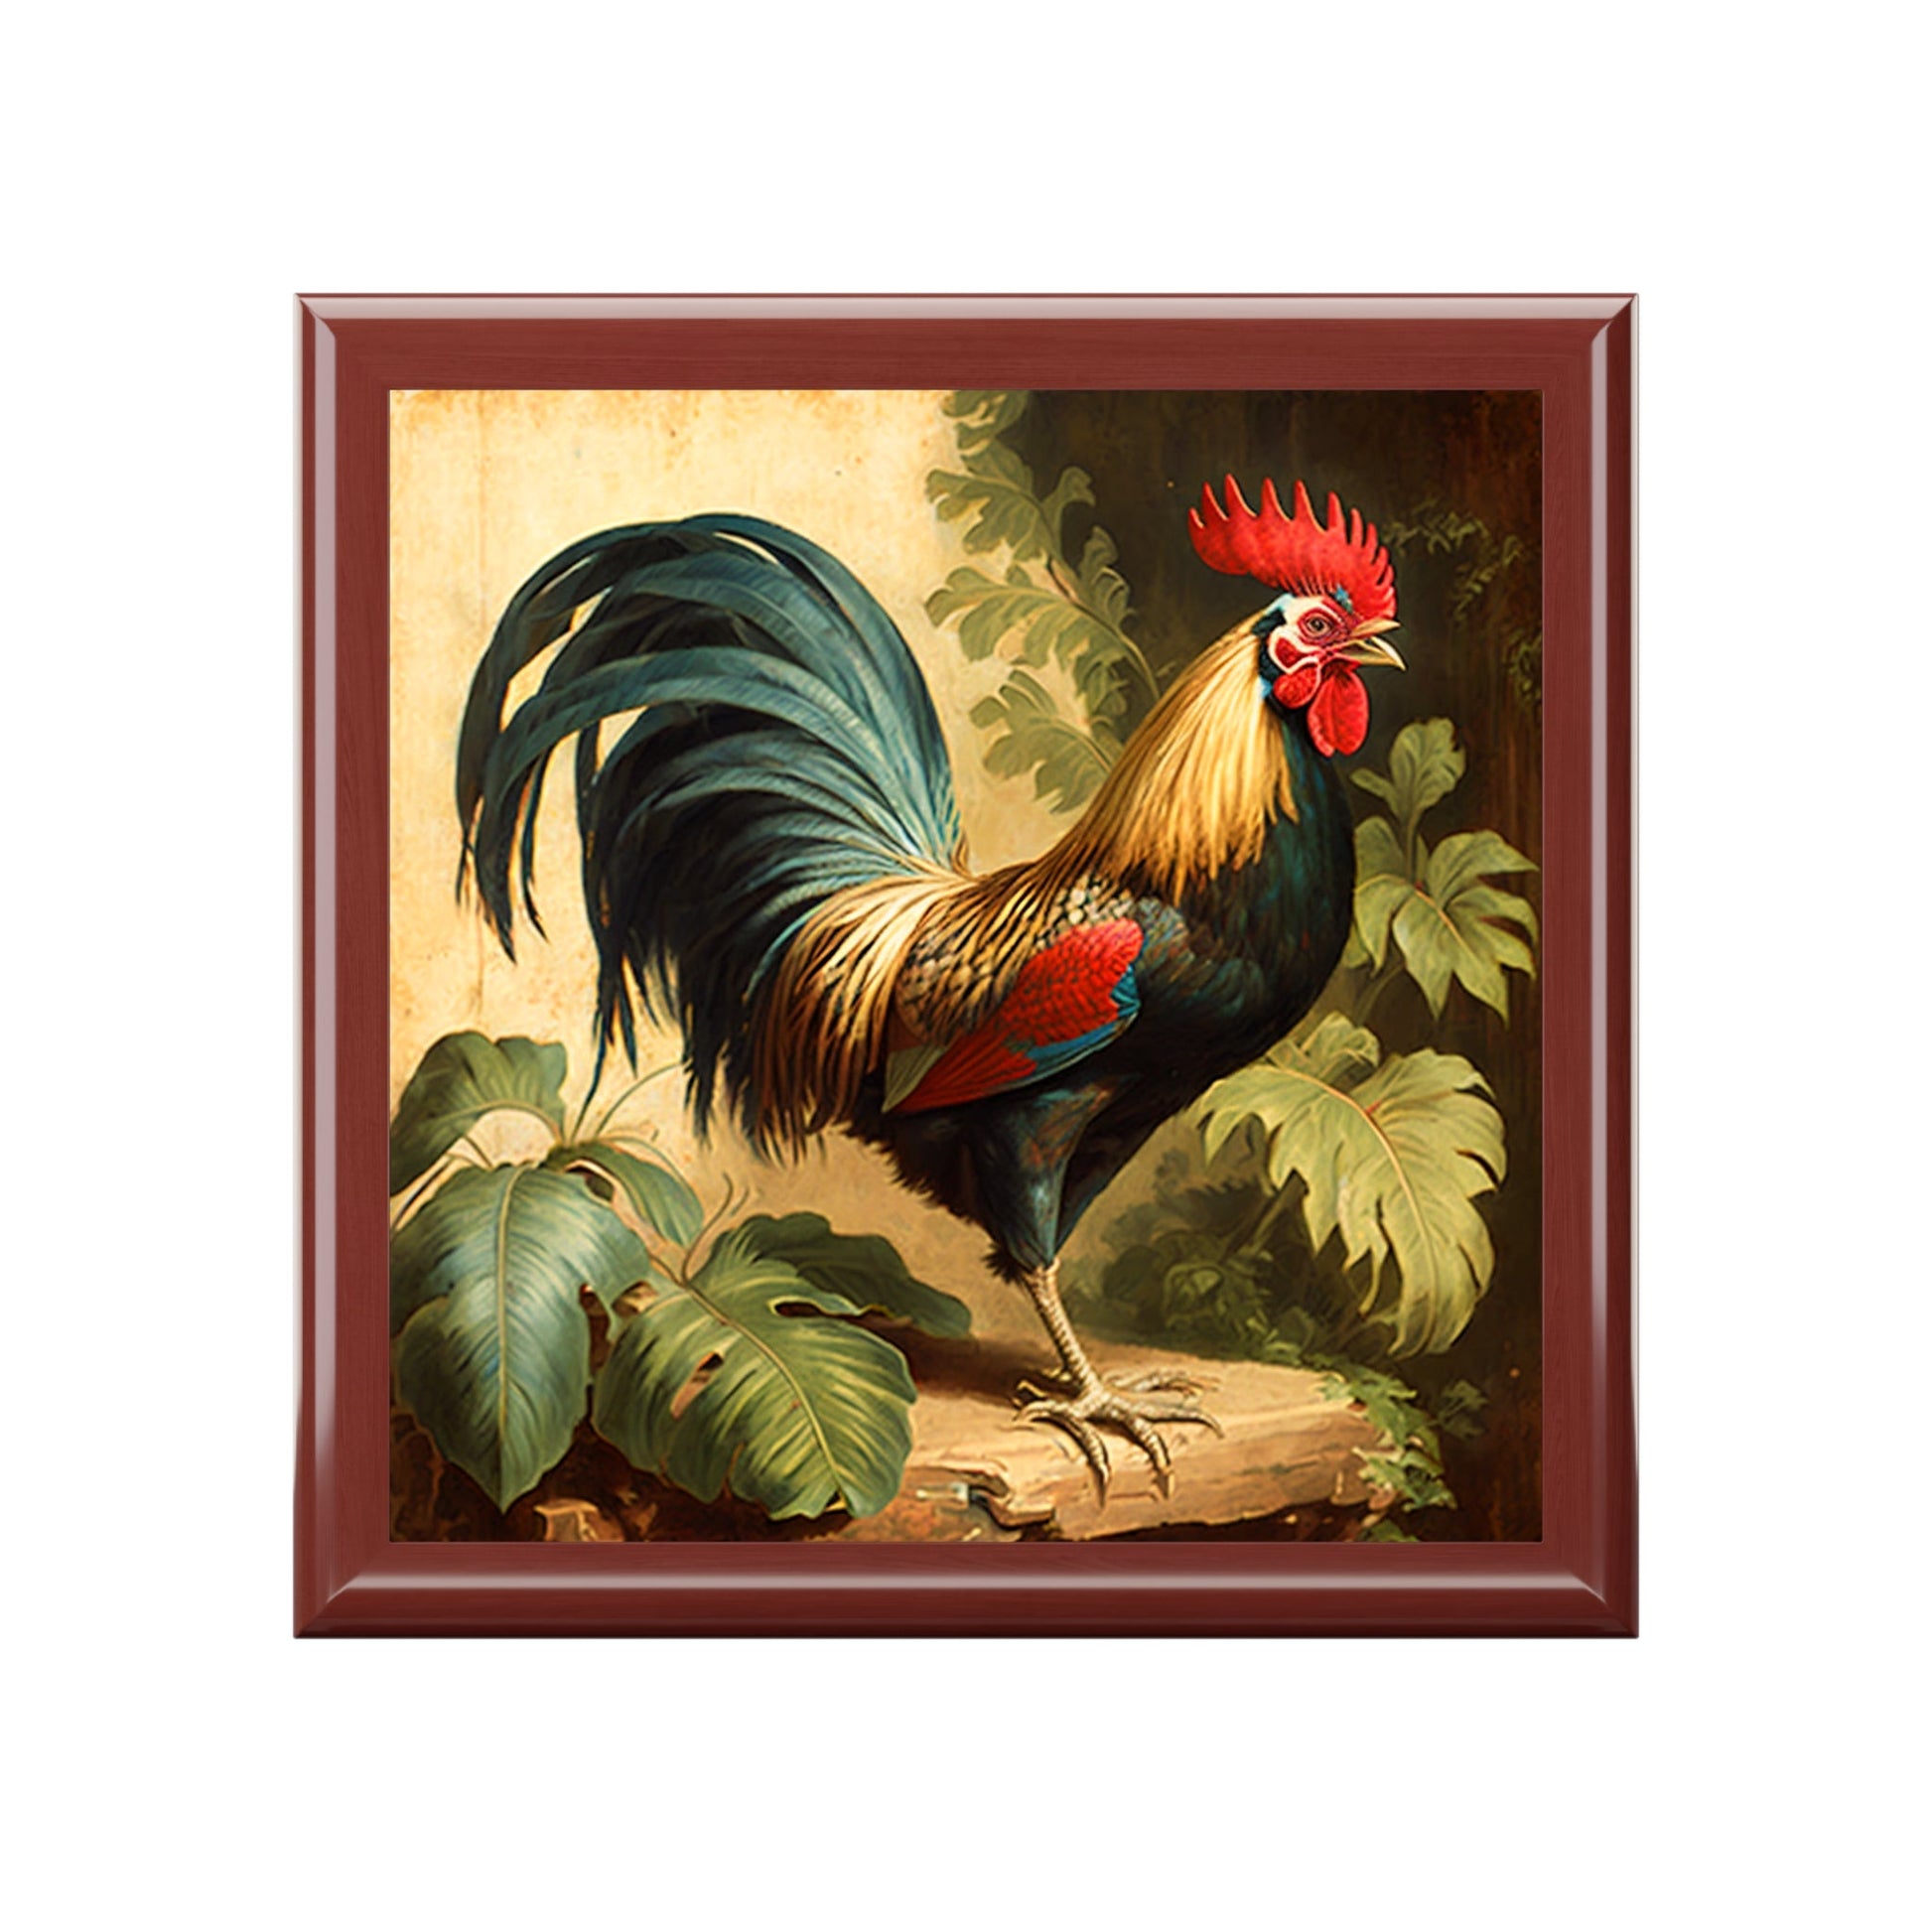 Vintage Antique Rooster Wood Keepsake Jewelry Box with Ceramic Tile Cover